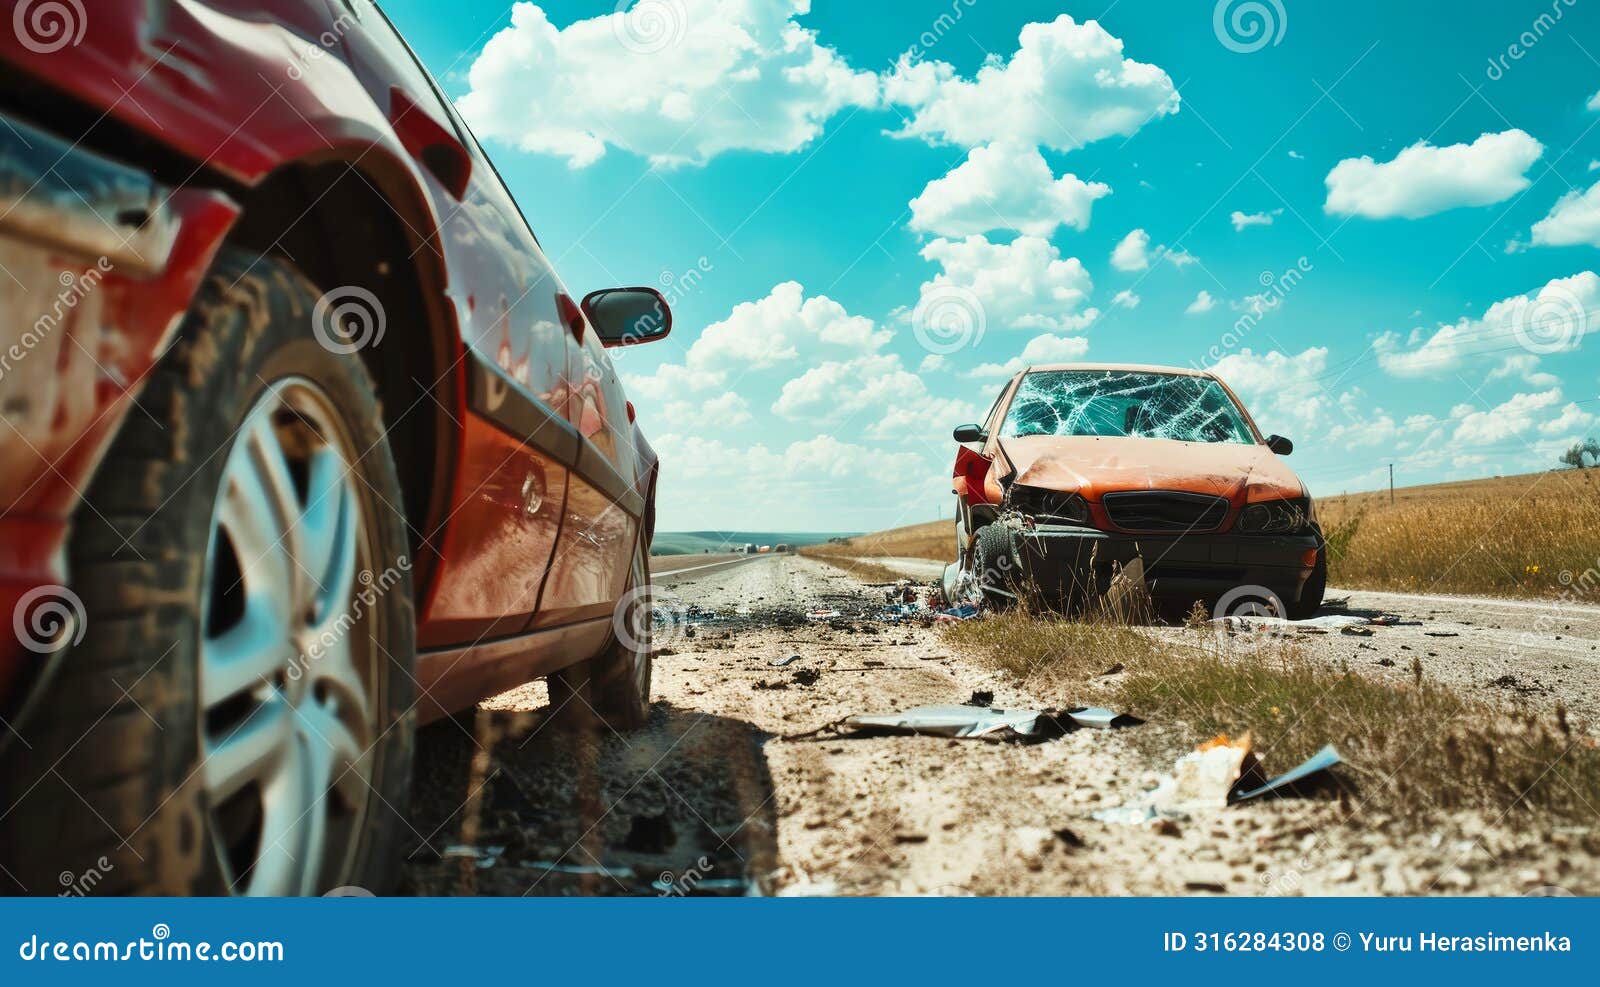 a bright red mustang sits stranded by the roadside, appearing forlorn and abandoned